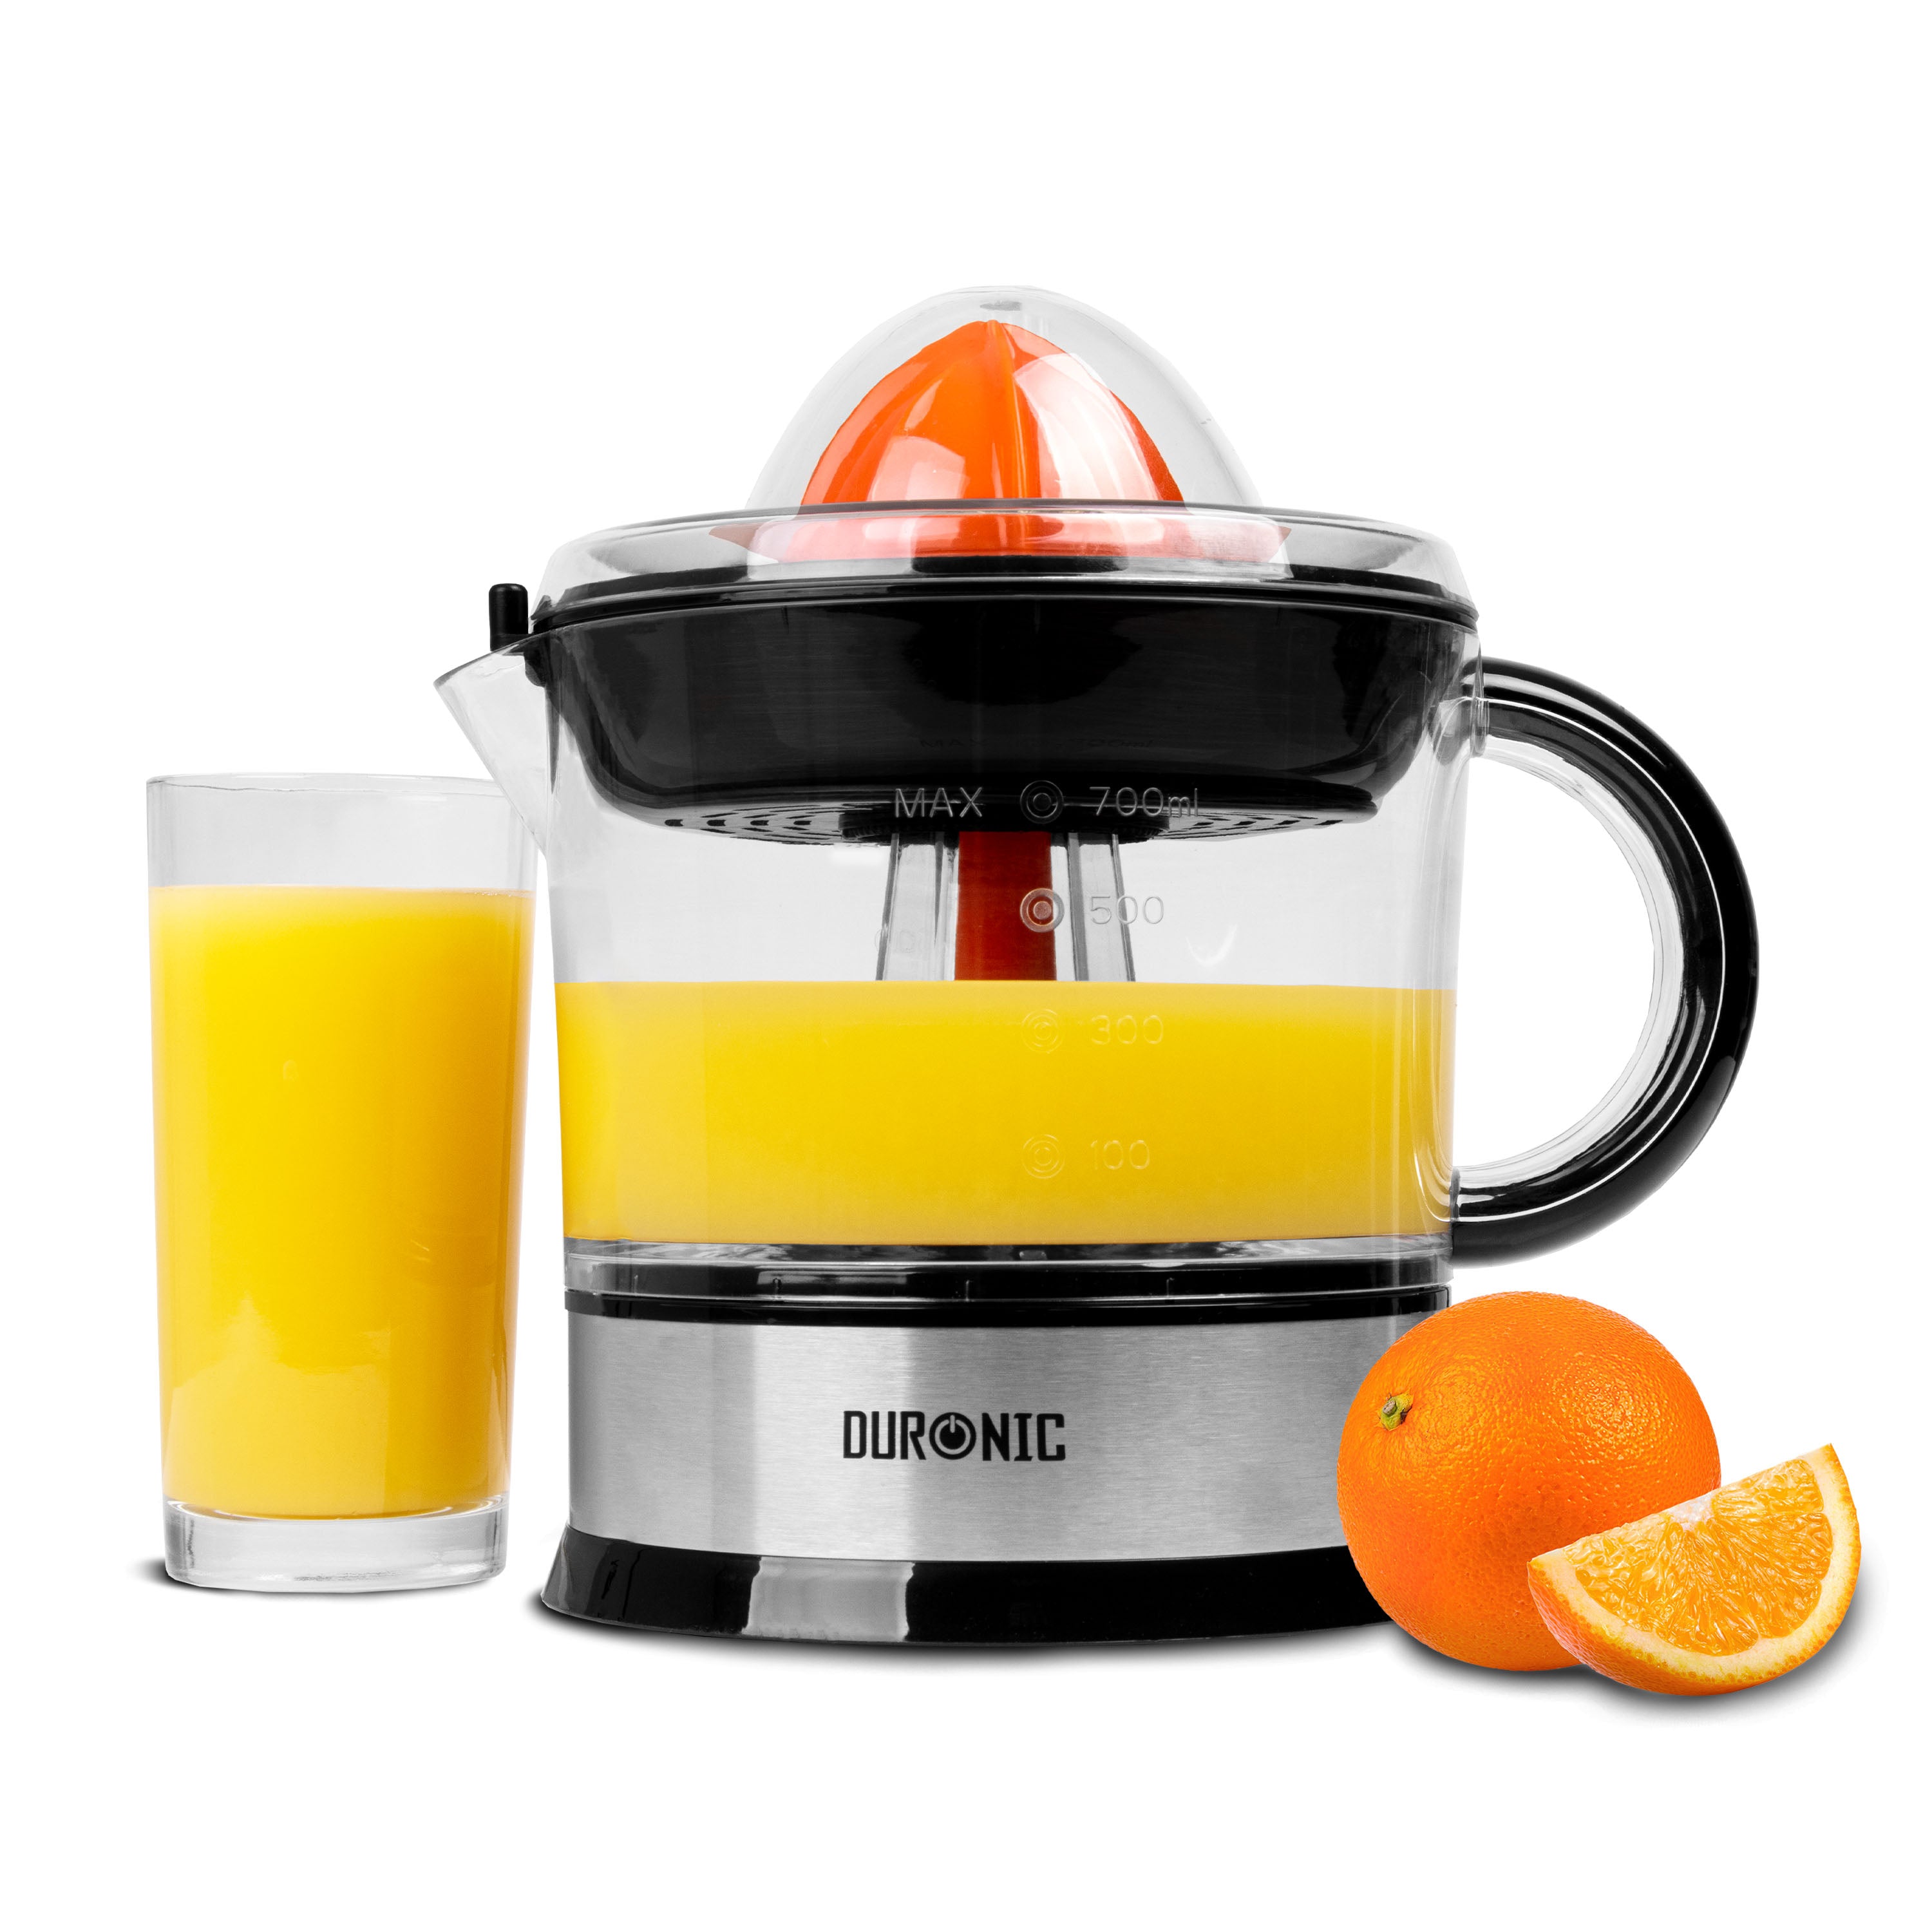 Is It Worth Buying an Electric Citrus Juicer?